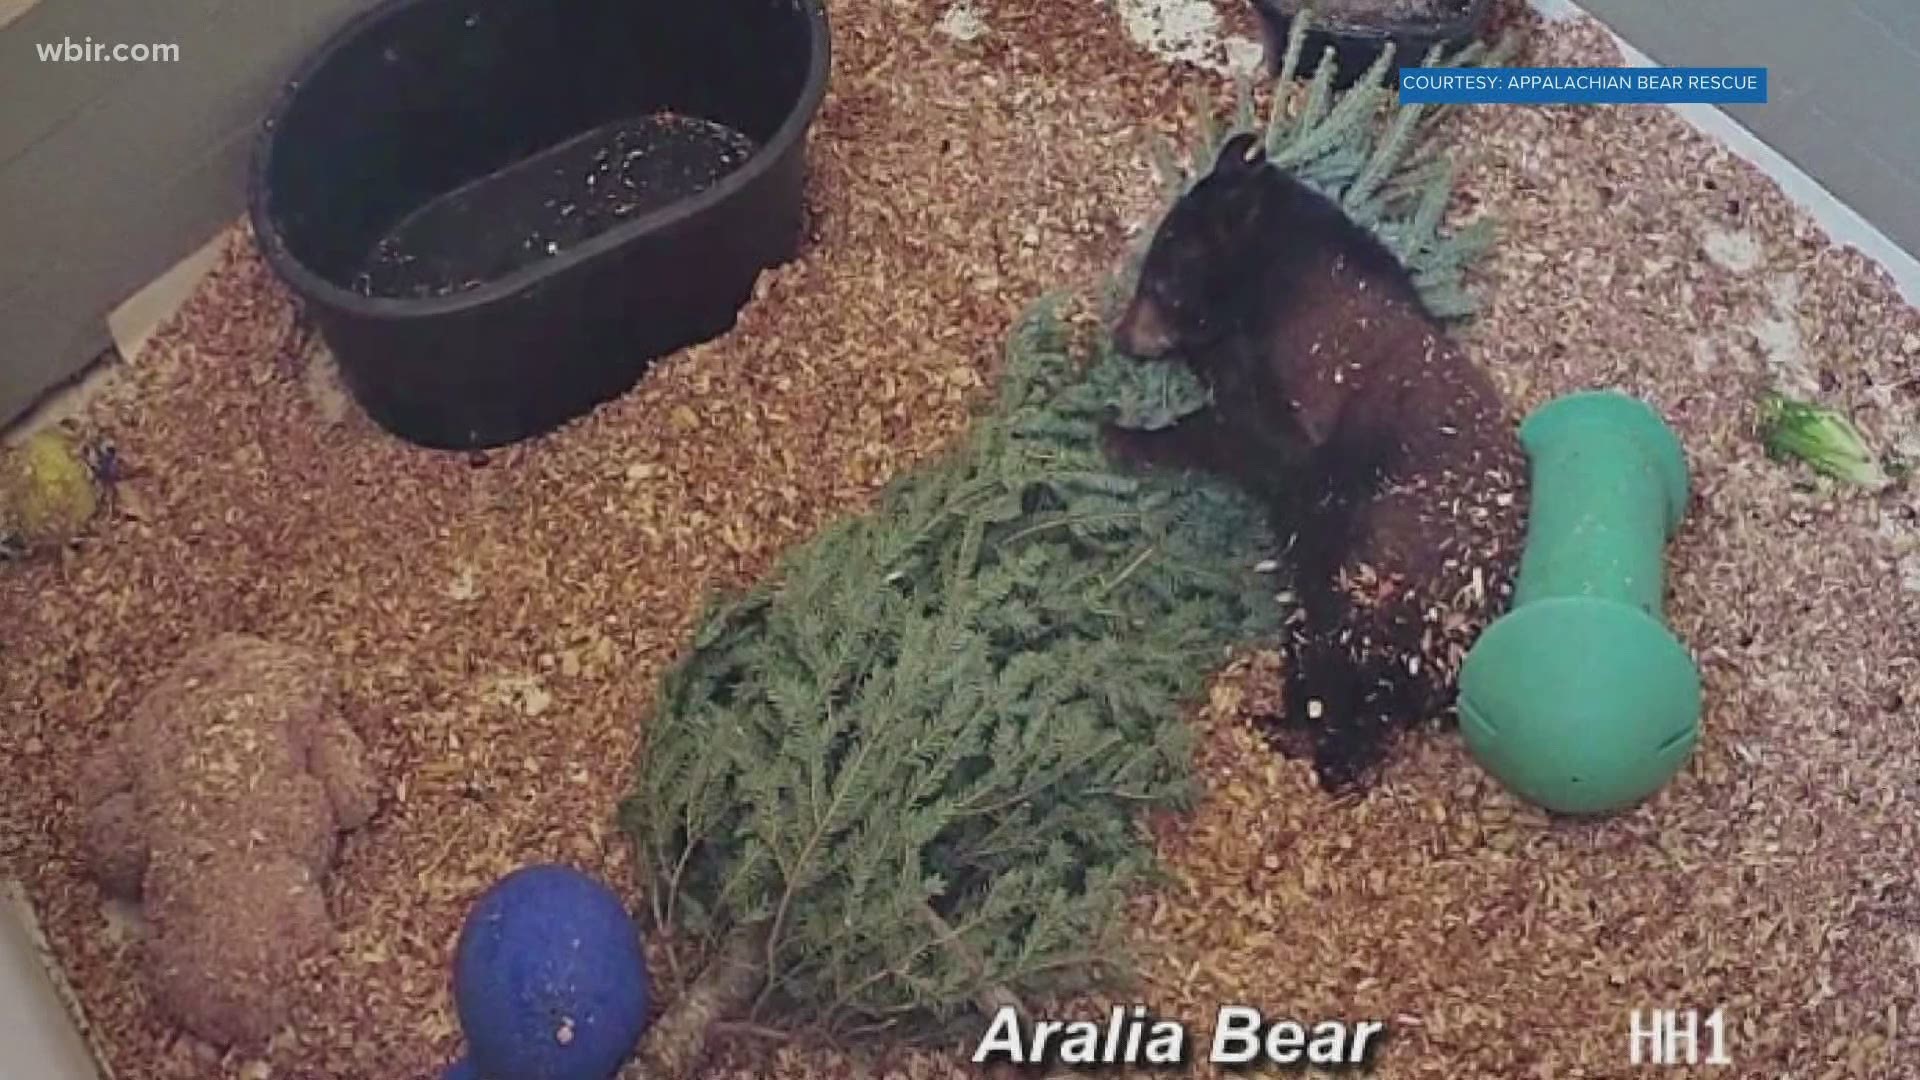 The cubs at Appalachian Bear Rescue got some presents for Christmas — Christmas trees!